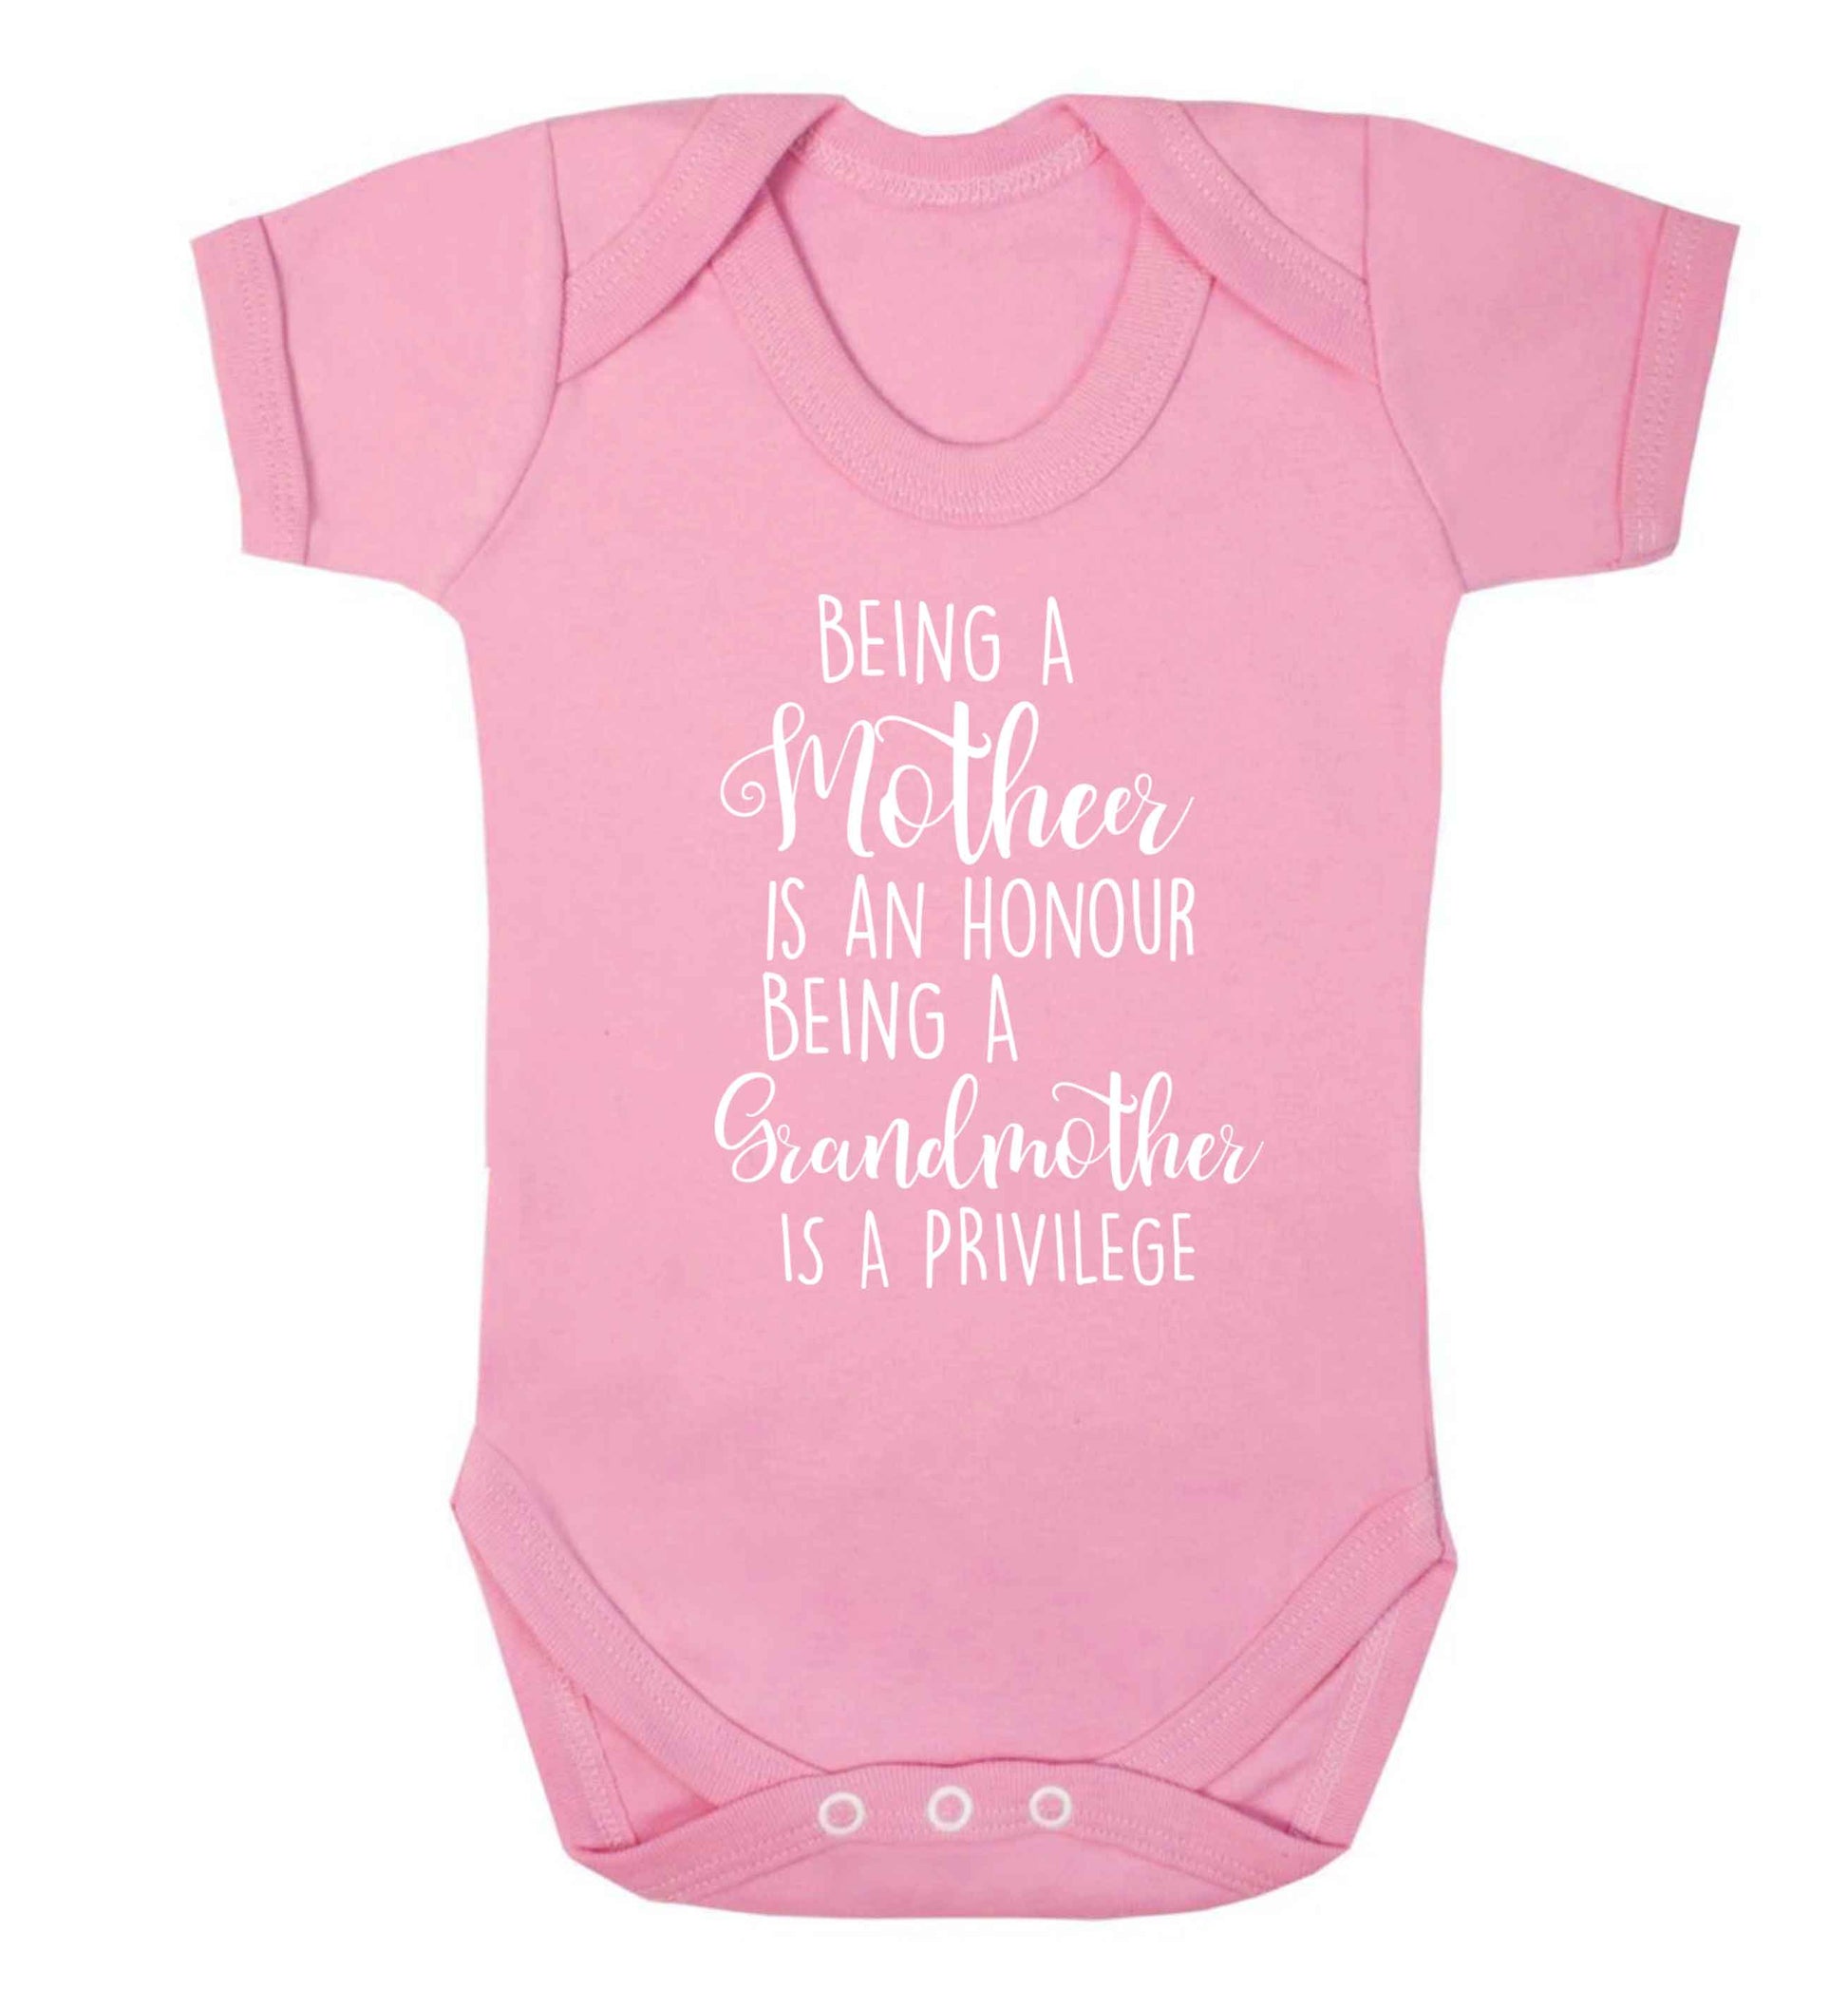 Being a mother is an honour being an grandmother is a privilege Baby Vest pale pink 18-24 months